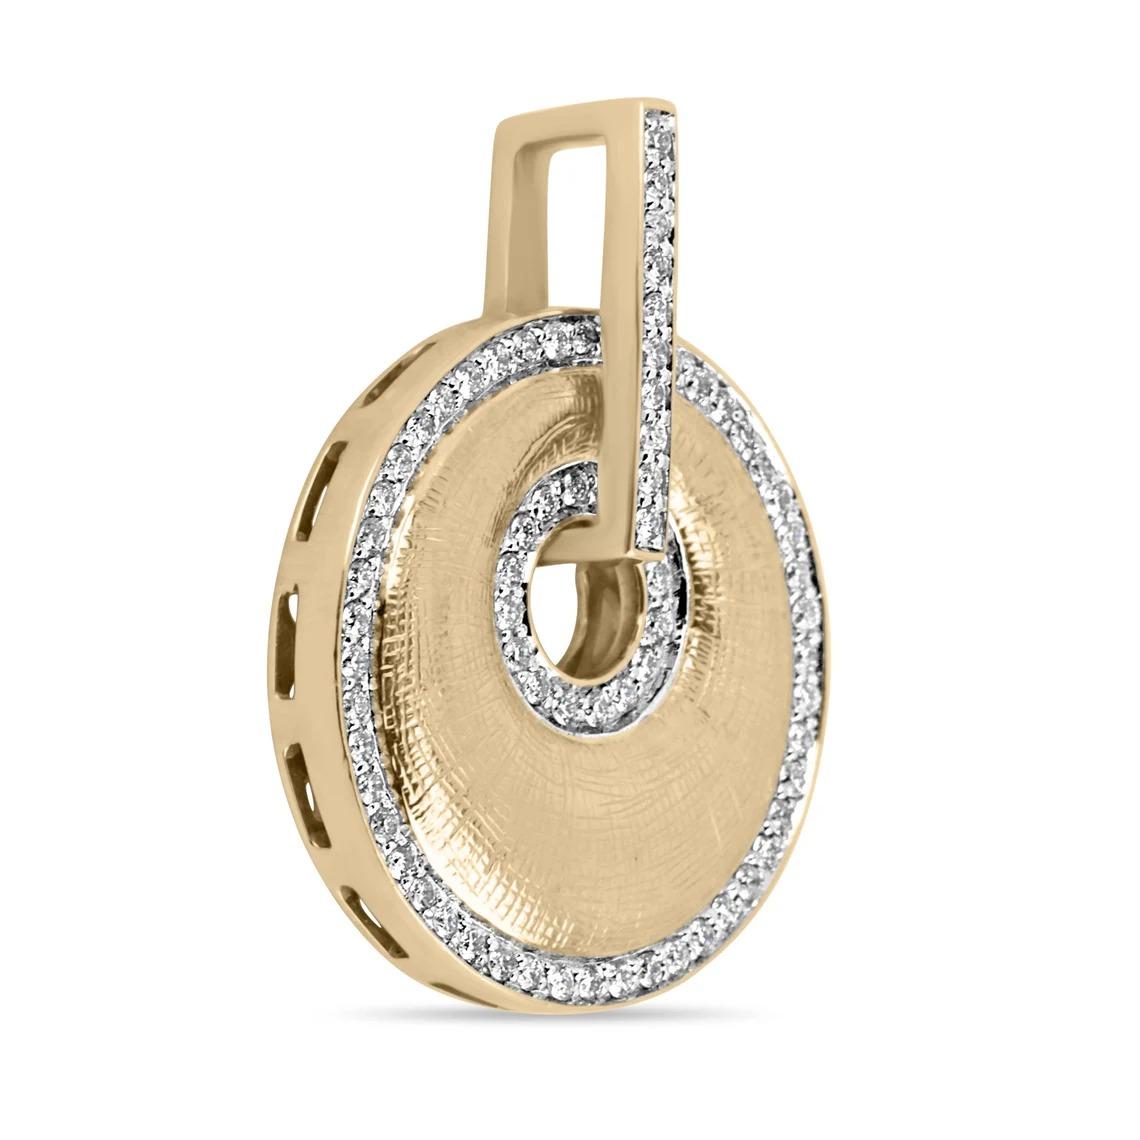 *Chain sold separately.

Setting Style: Pave/Halo
Setting Material: 14K Yellow Gold
Setting Weight: 10.6 Grams

Main Stone: Diamond
Weight: 0.40-Carats (Total)
Cut: Brilliant Round
Clarity: VS
Color: H
Luster: Excellent
Treatments: